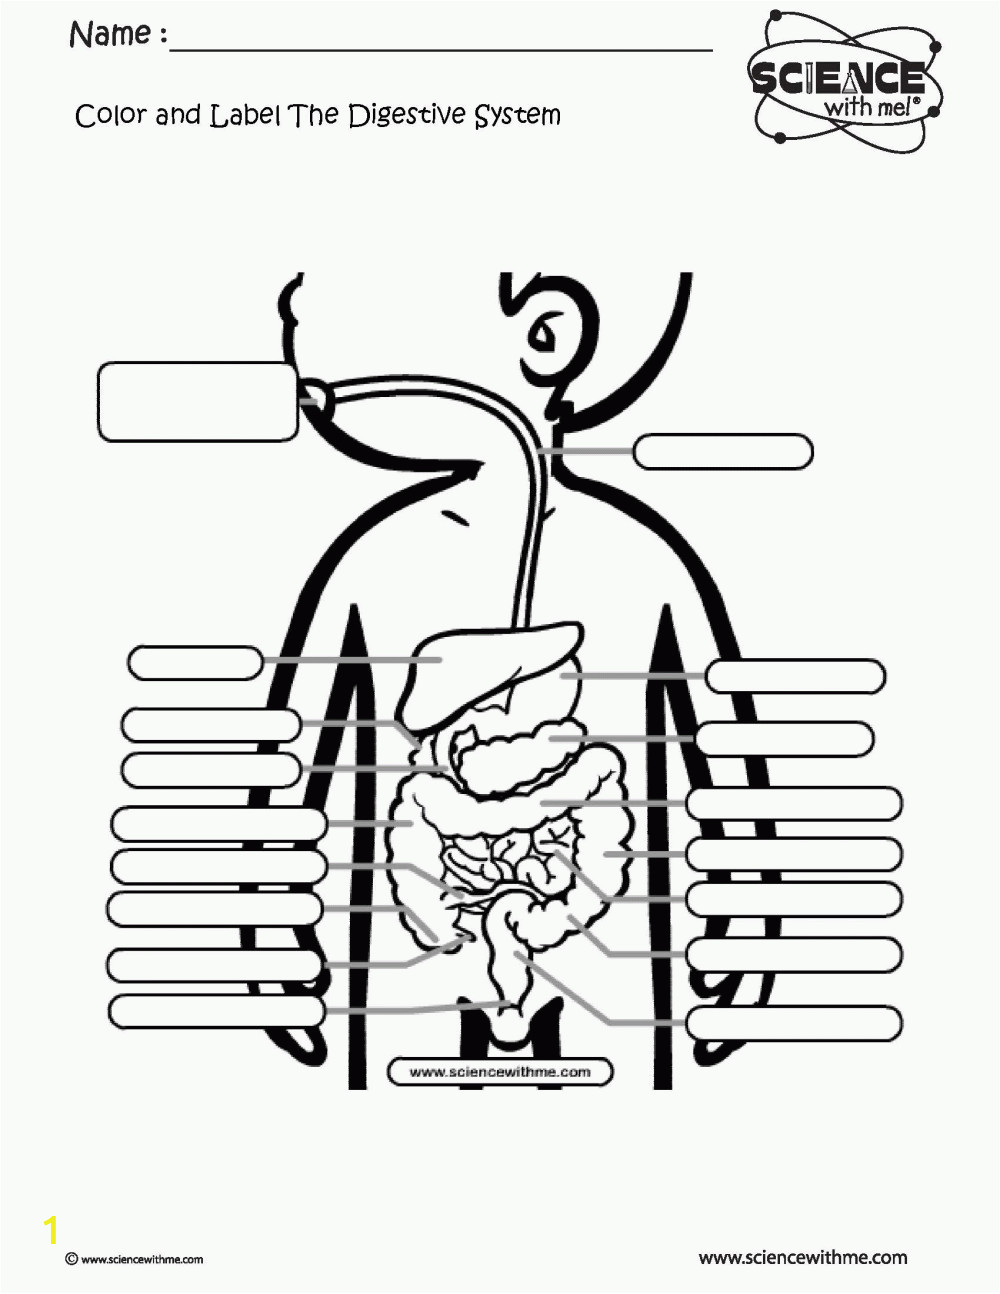 Digestive System Coloring Page for Kids Coloring Page for Digestive System Coloring Home